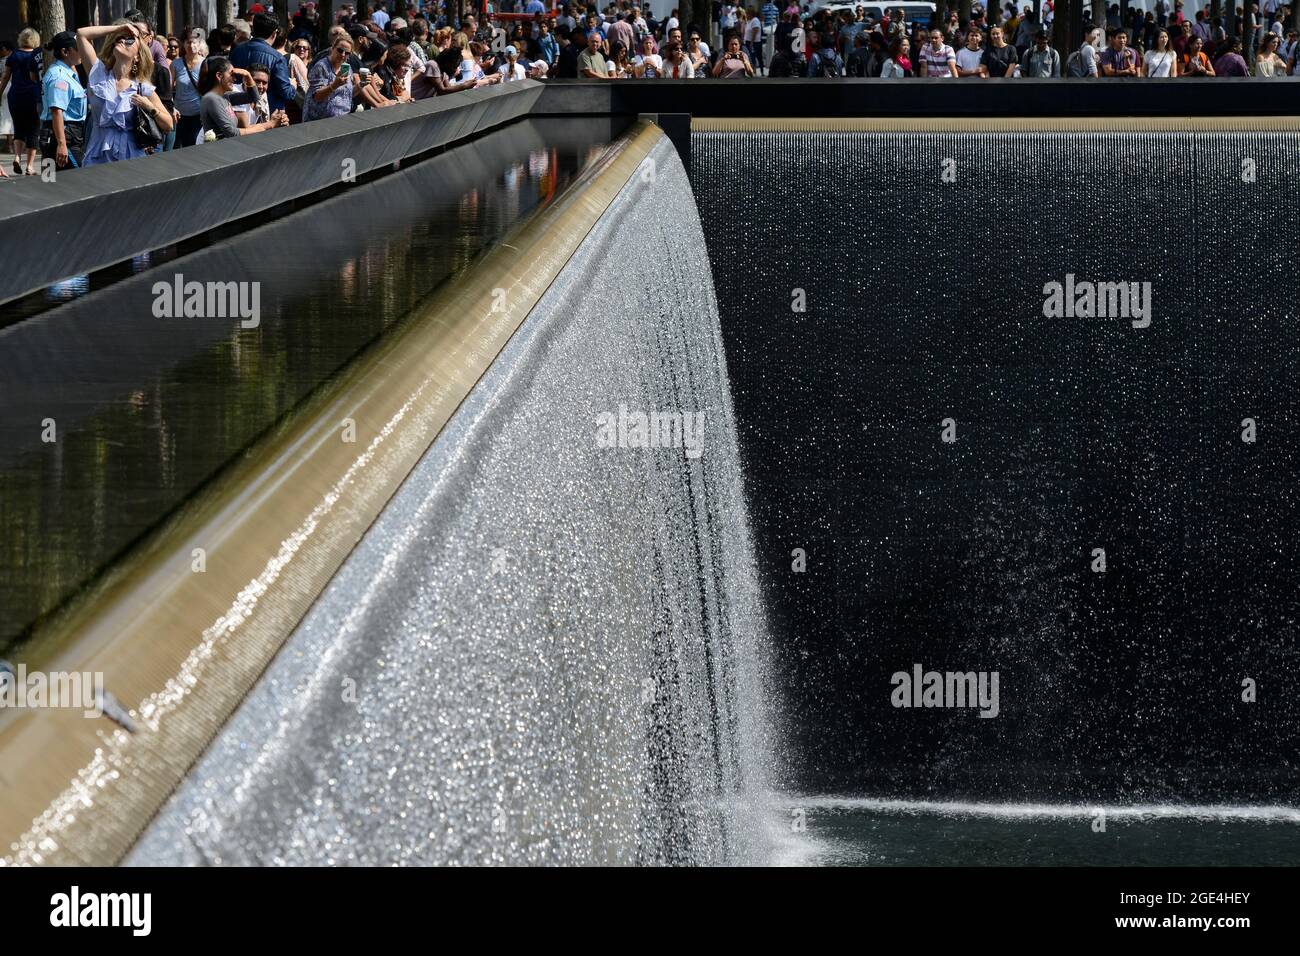 USA, New York City, 9/11 memorial Ground Zero for memory of the victims of terrorist attack of 11th September 2001 at tower of world trade center, water basin, reflecting pool , flowing water, waterfall Stock Photo